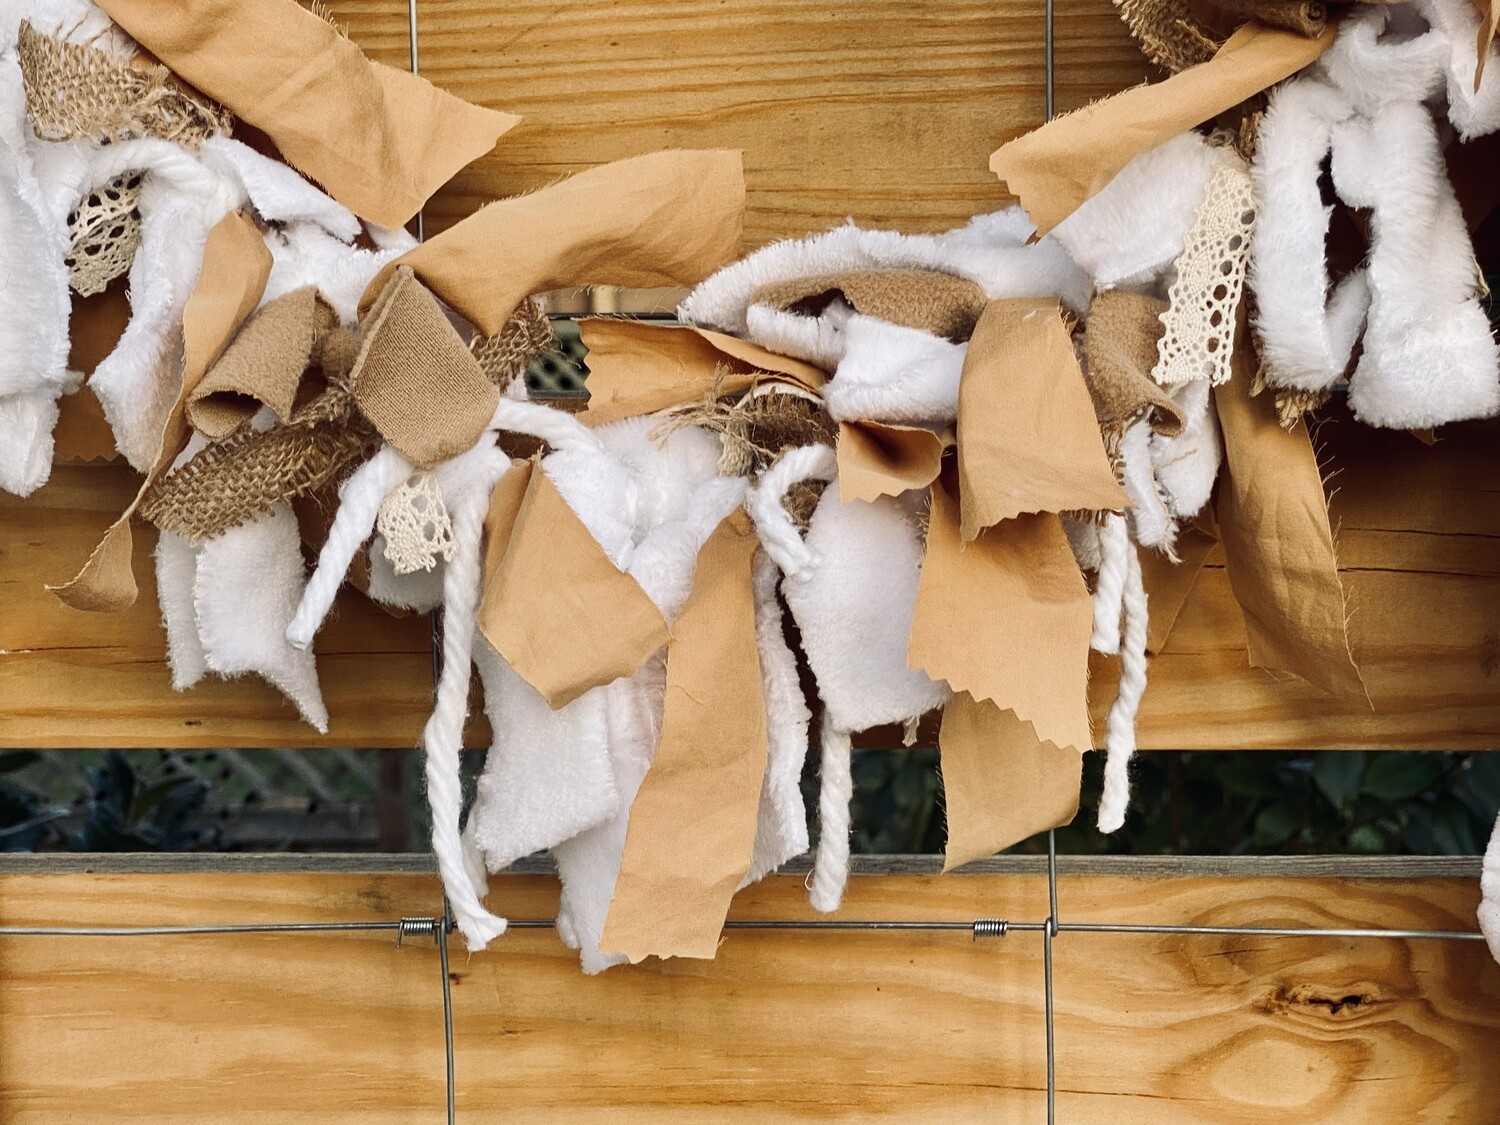 Cottage Rustic Rag Garland (neutral, rope, twine, burlap, fabric, lace)